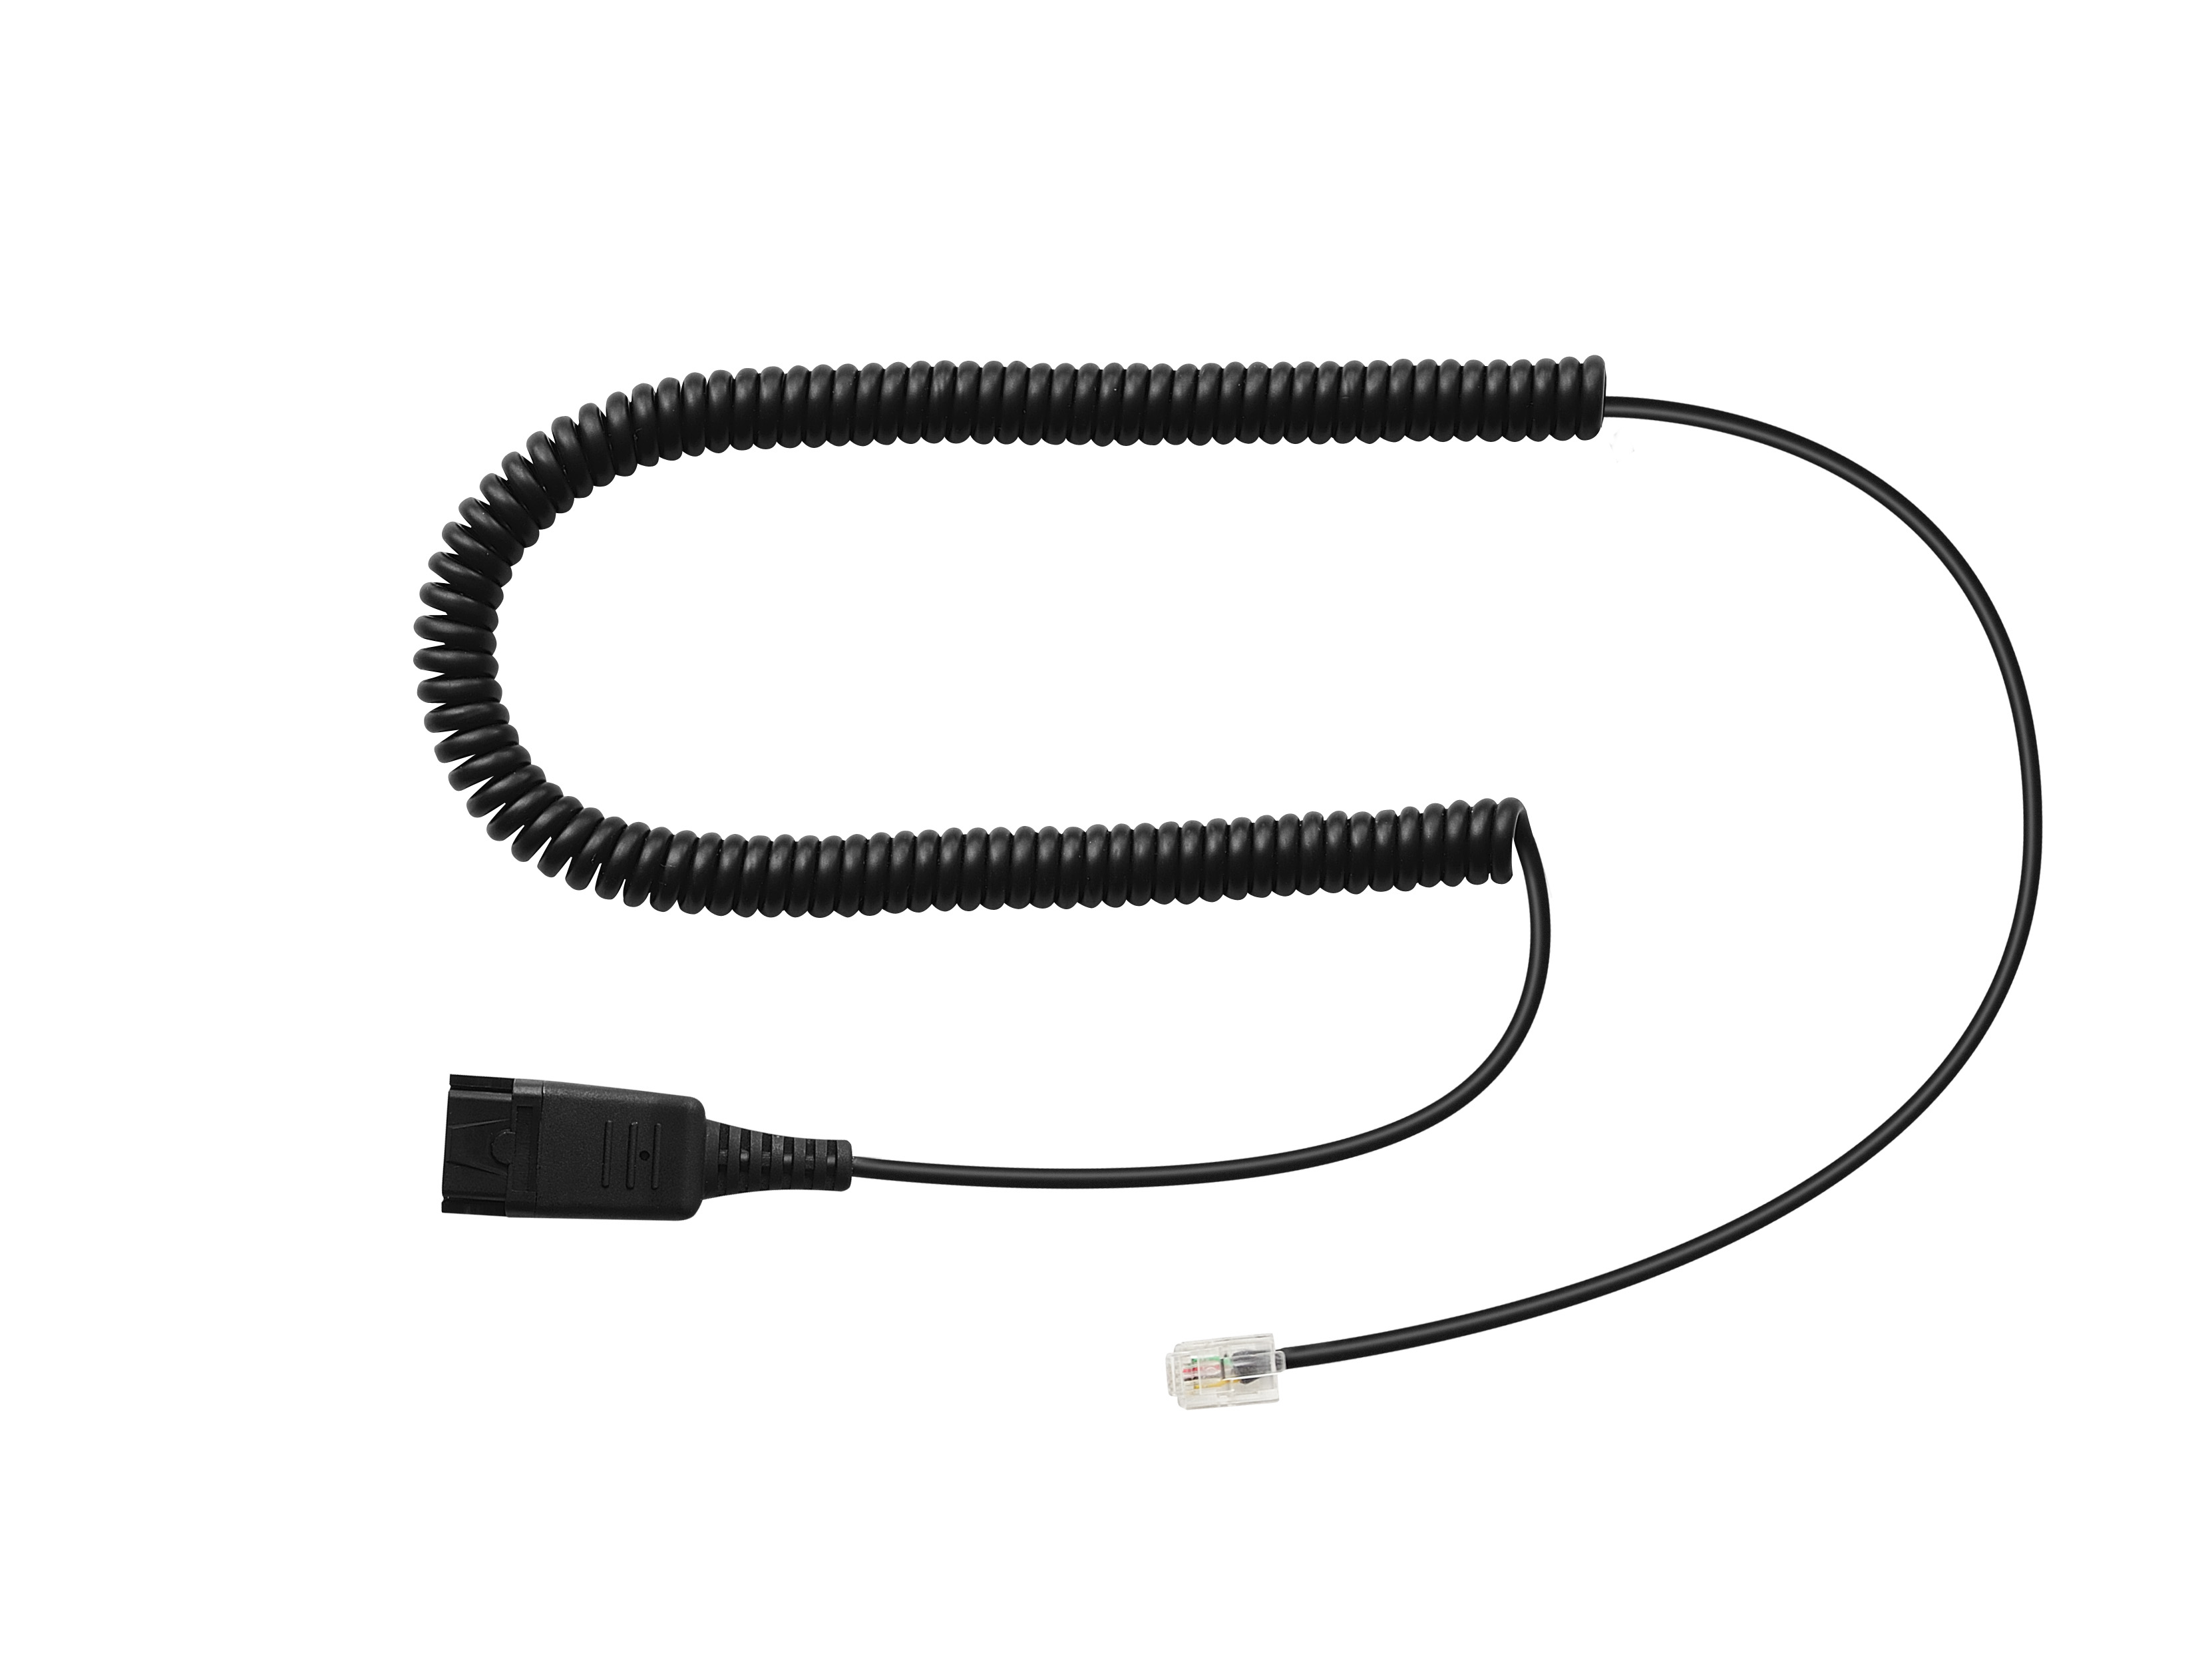 ADDASOUND DN1001 headphone/headset accessory Cable